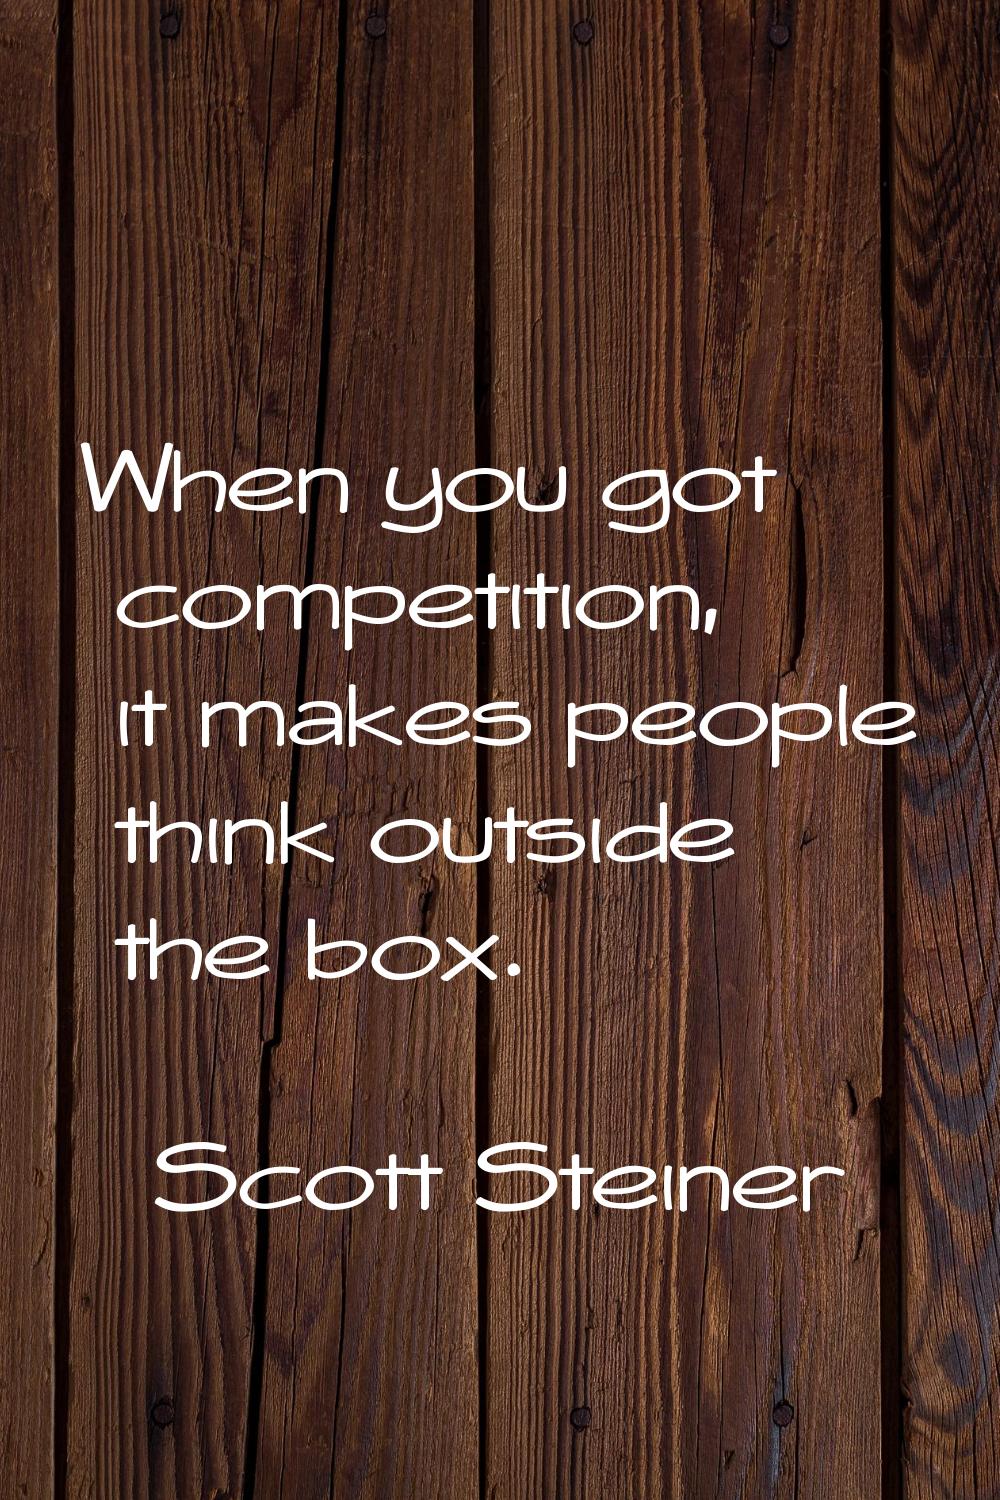 When you got competition, it makes people think outside the box.